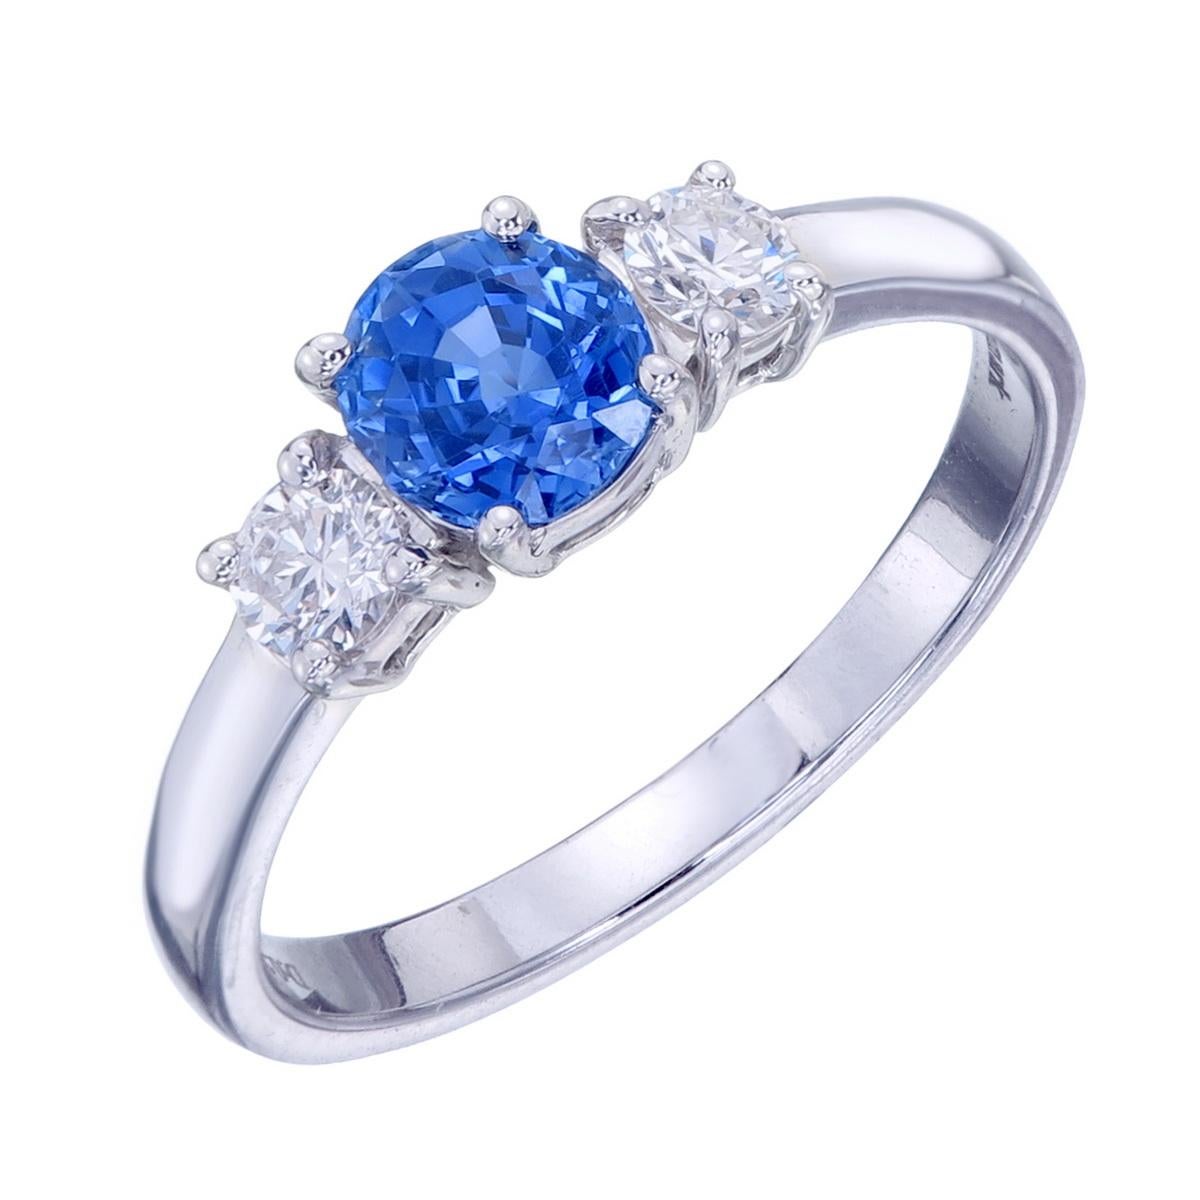 Cornflower Ceylon Sapphire Diamond Ring set in 14 Karat White Gold.
Sri Lanka, previously known as Ceylon, is home to some of the most stunning rubies and sapphires in the world; including this particular blue sapphire which has been given the color